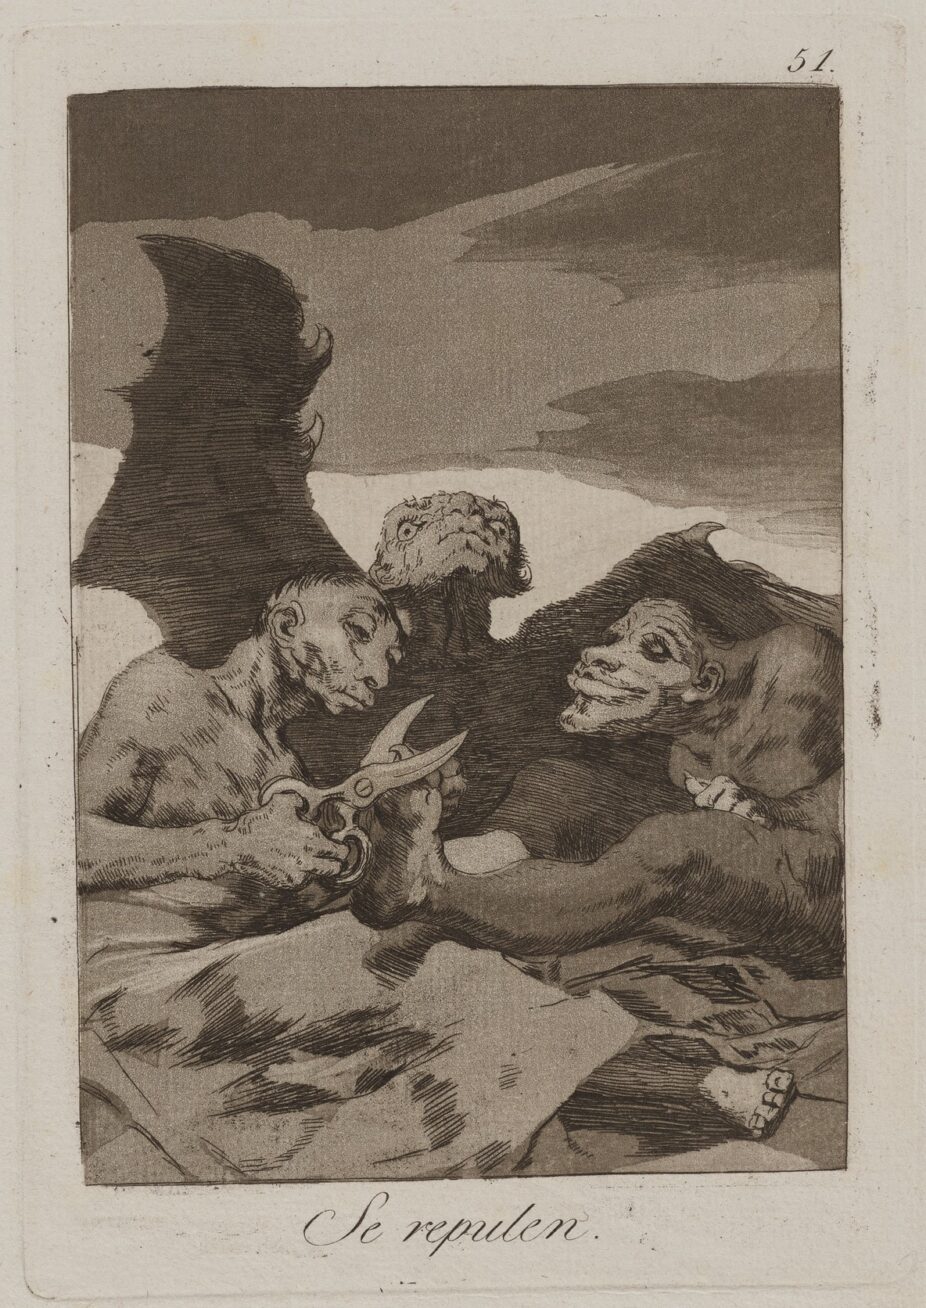 2. Se Repulen (They Spruce Themselves Up), plate 51 from the series Los Caprichos, 1799, etching, plate: 8 5/16 in x 5 13/16 in; sheet: 11 11/16 in x 7 5/8 in. Three goblins sit entwined horizontally, the one at far left carefully clipping the one at right’s left toenail with large scissors. The middle goblin is winged and in the shadows.